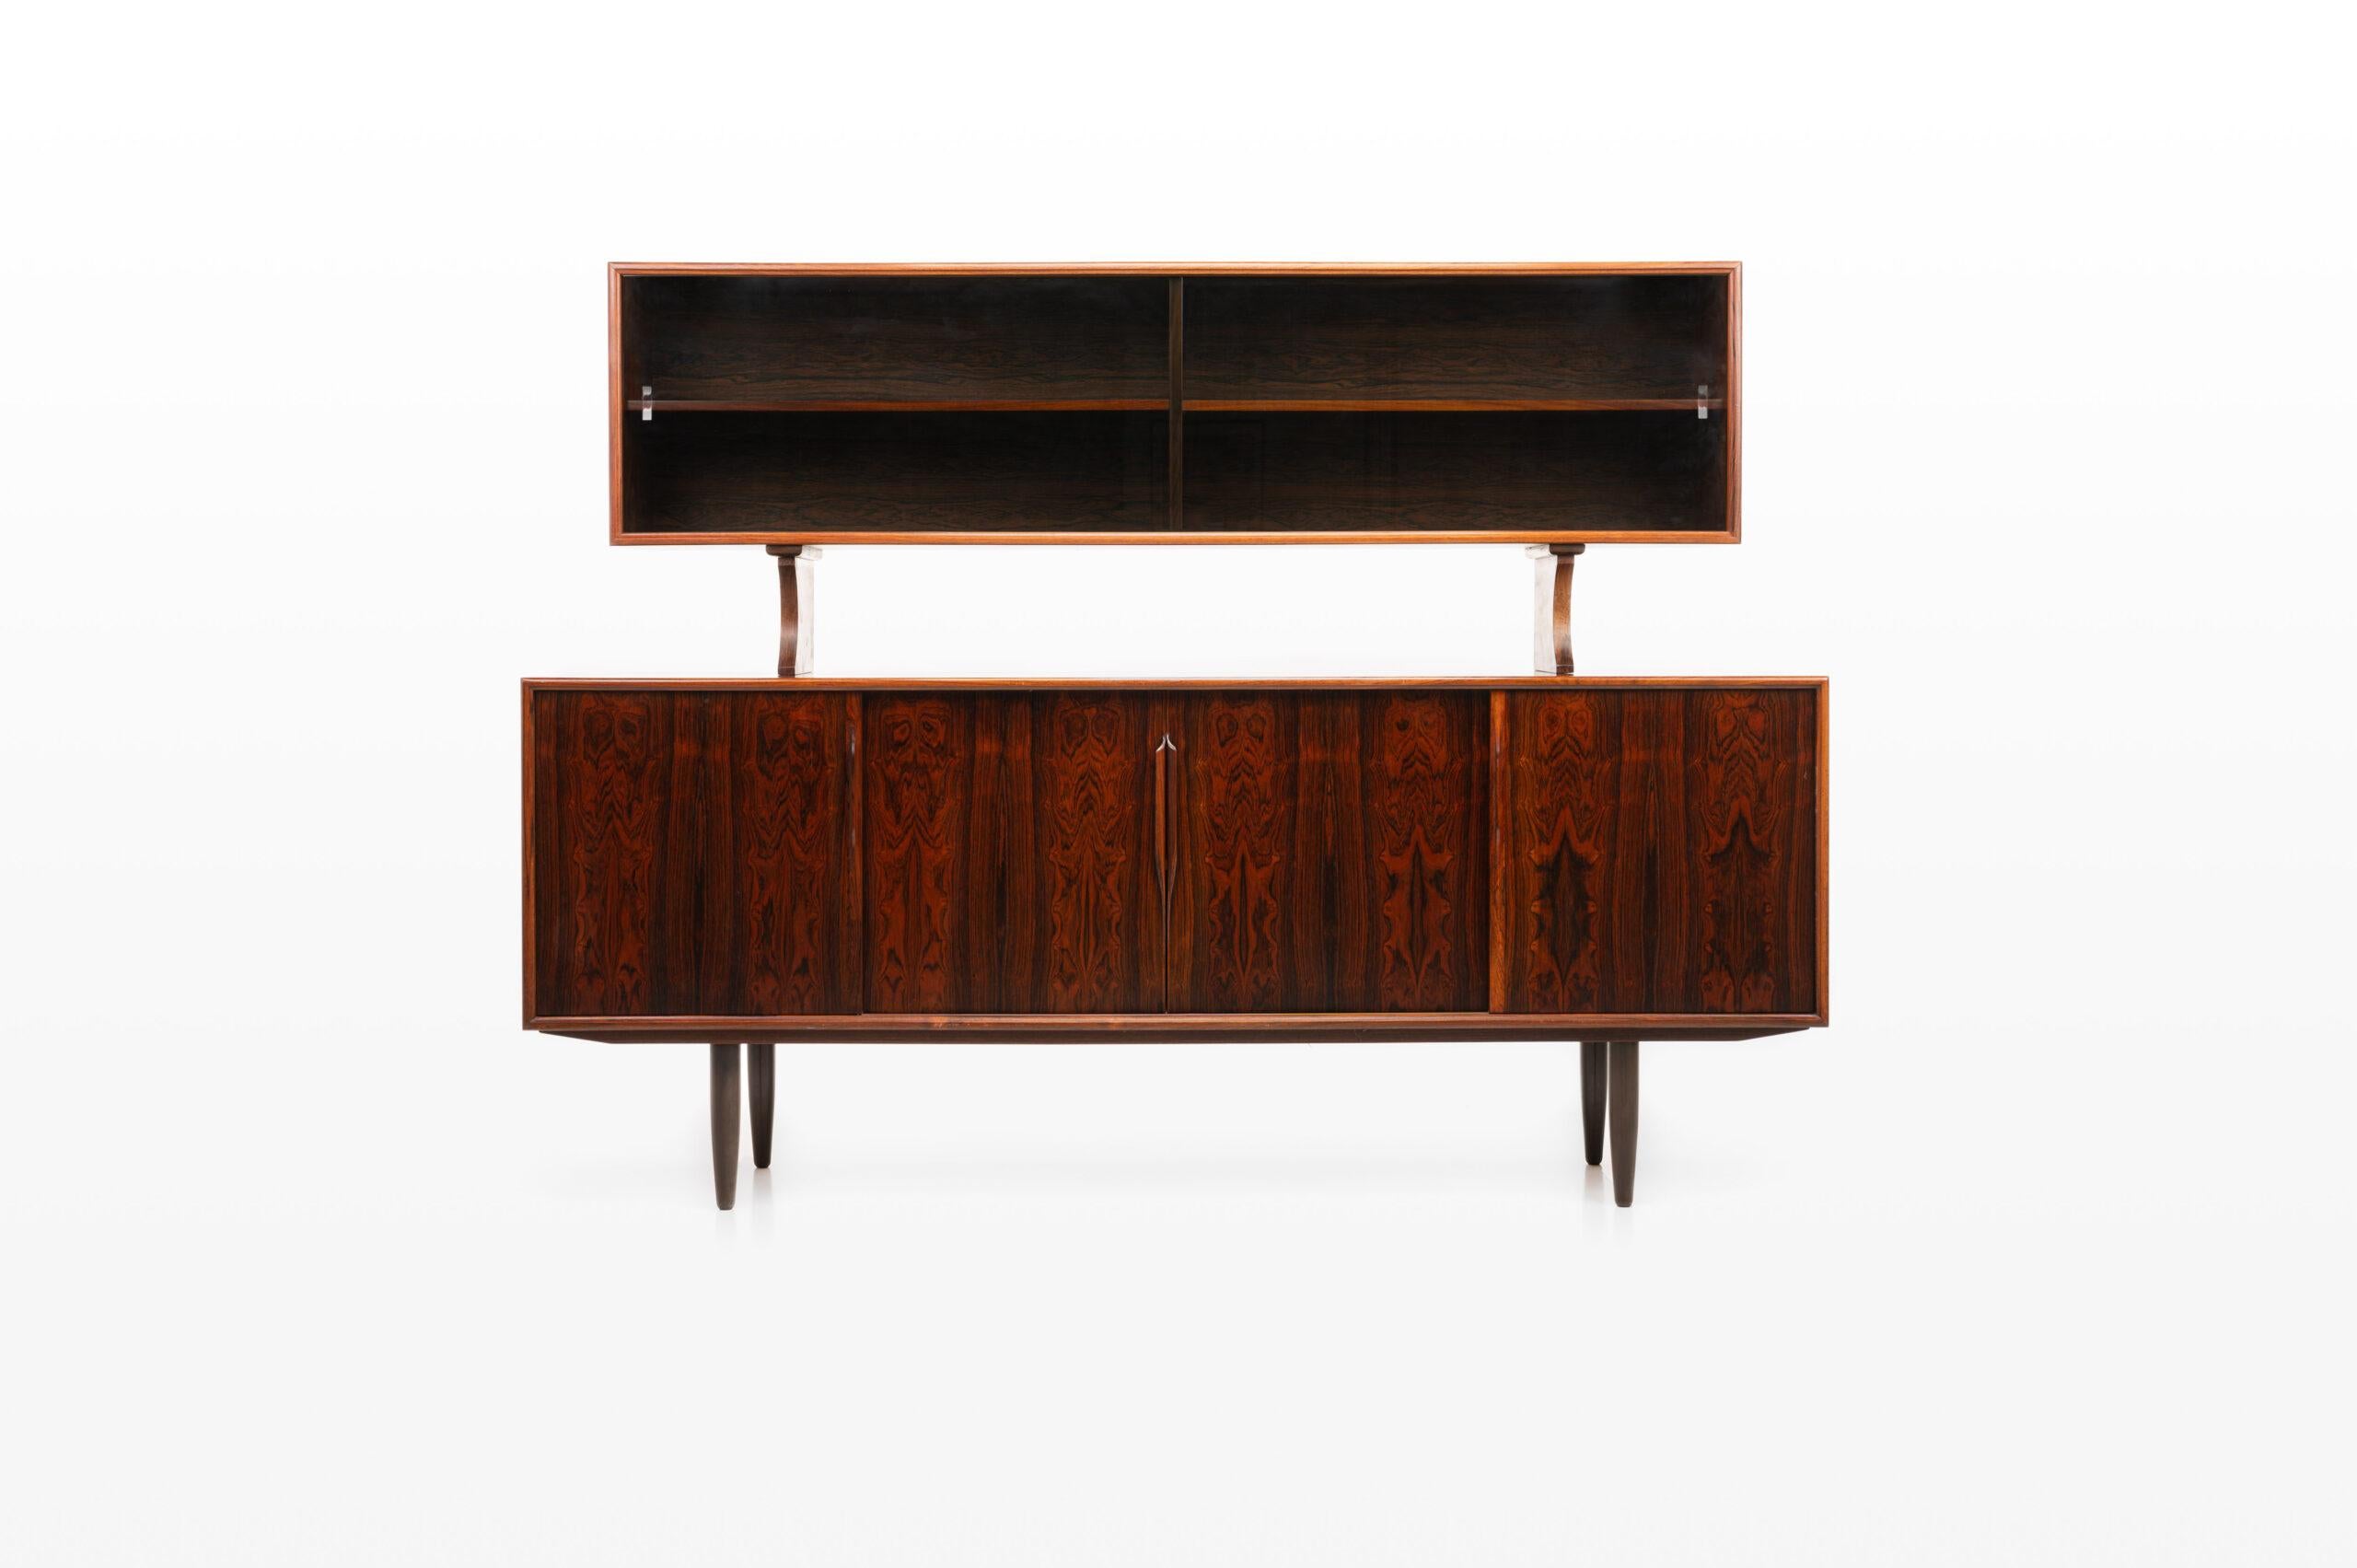 Rare Rosewood Buffet Sideboard by Axel Christensen for ACO Møbler, Denmark 1960s For Sale 4